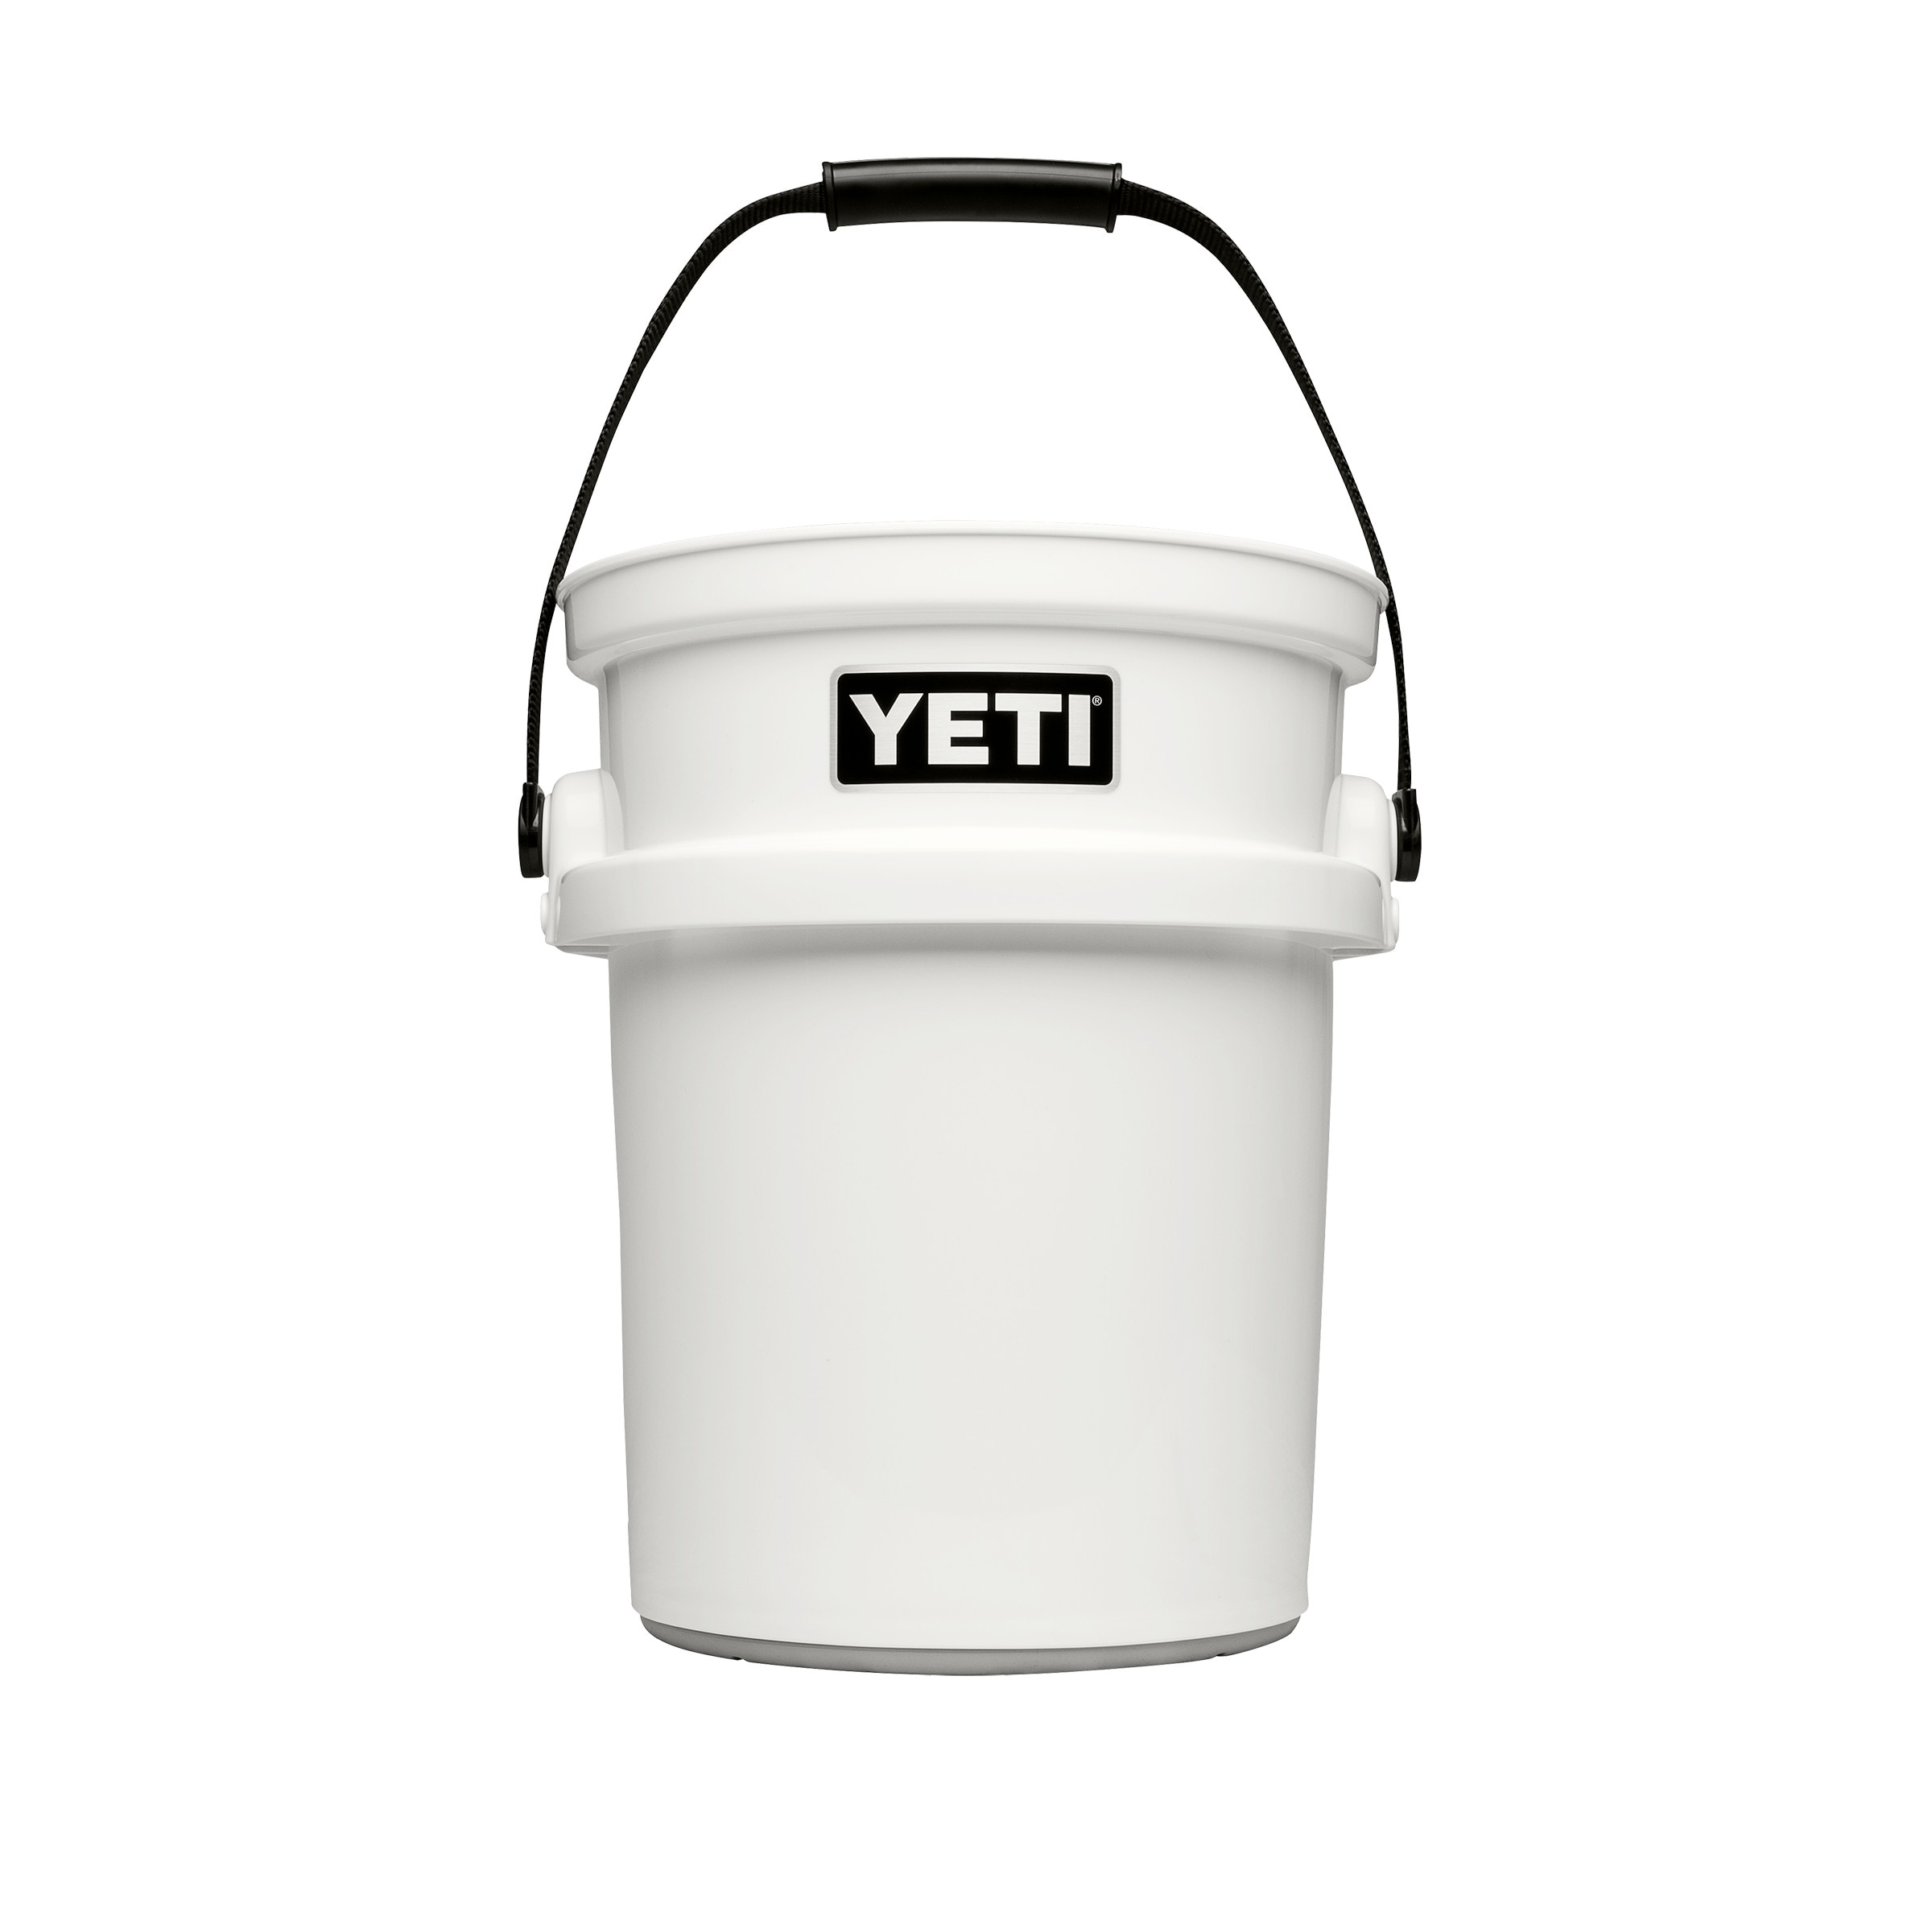 Meta-Cooler: YETI Patents Auto-Venting Food Jug to Hold Multiple